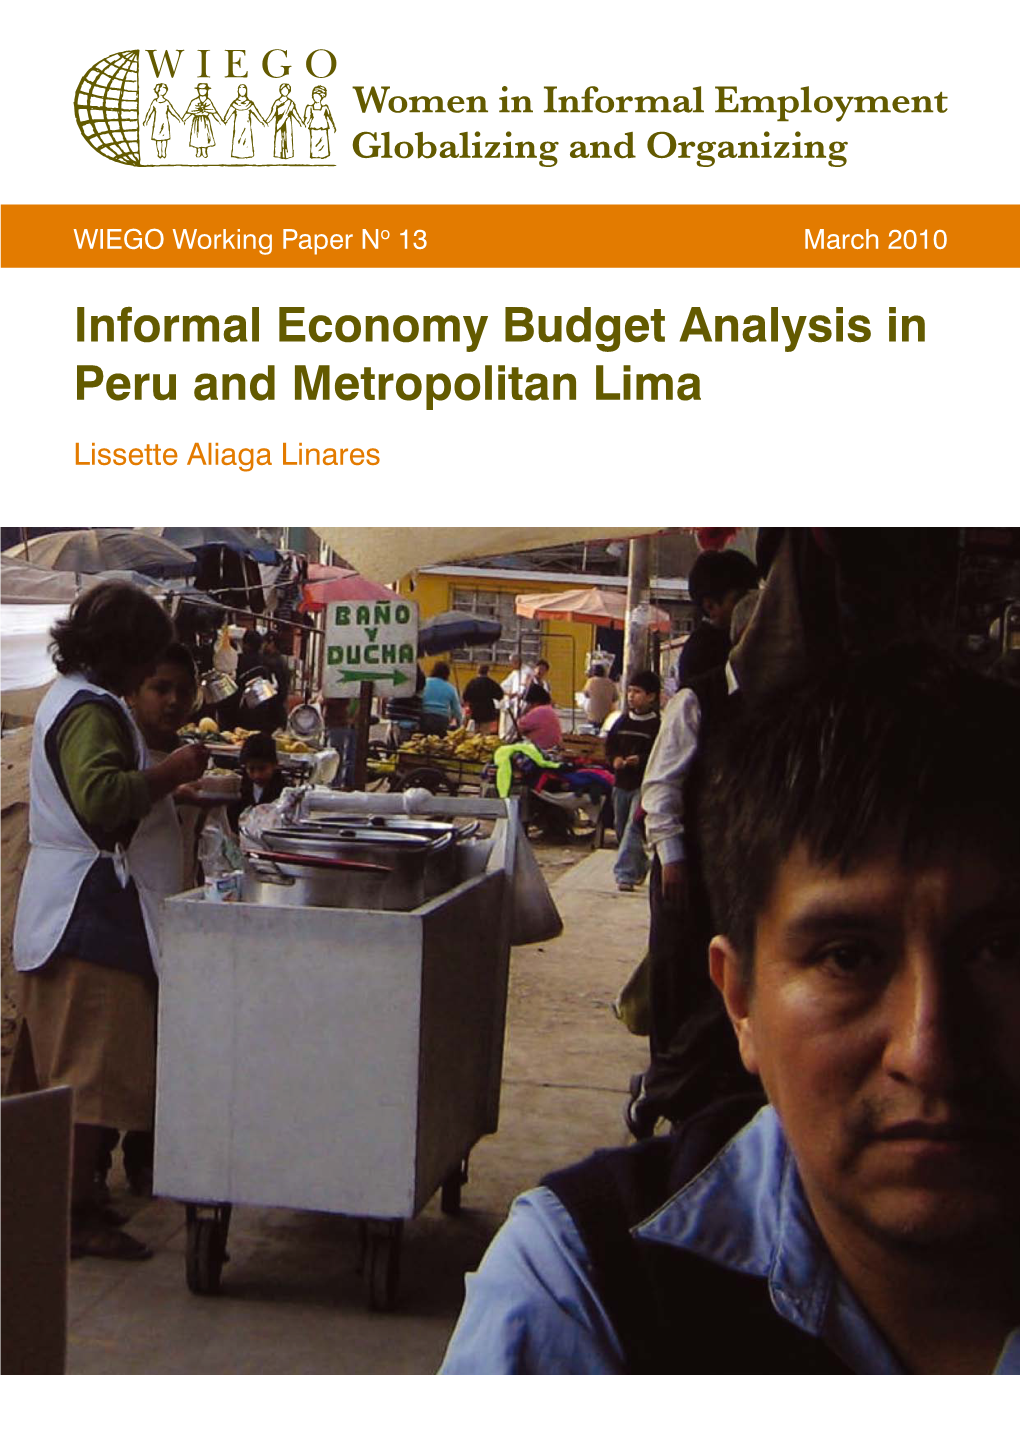 Informal Economy Budget Analysis in Peru and Metropolitan Lima Lissette Aliaga Linares WIEGO Working Papers*